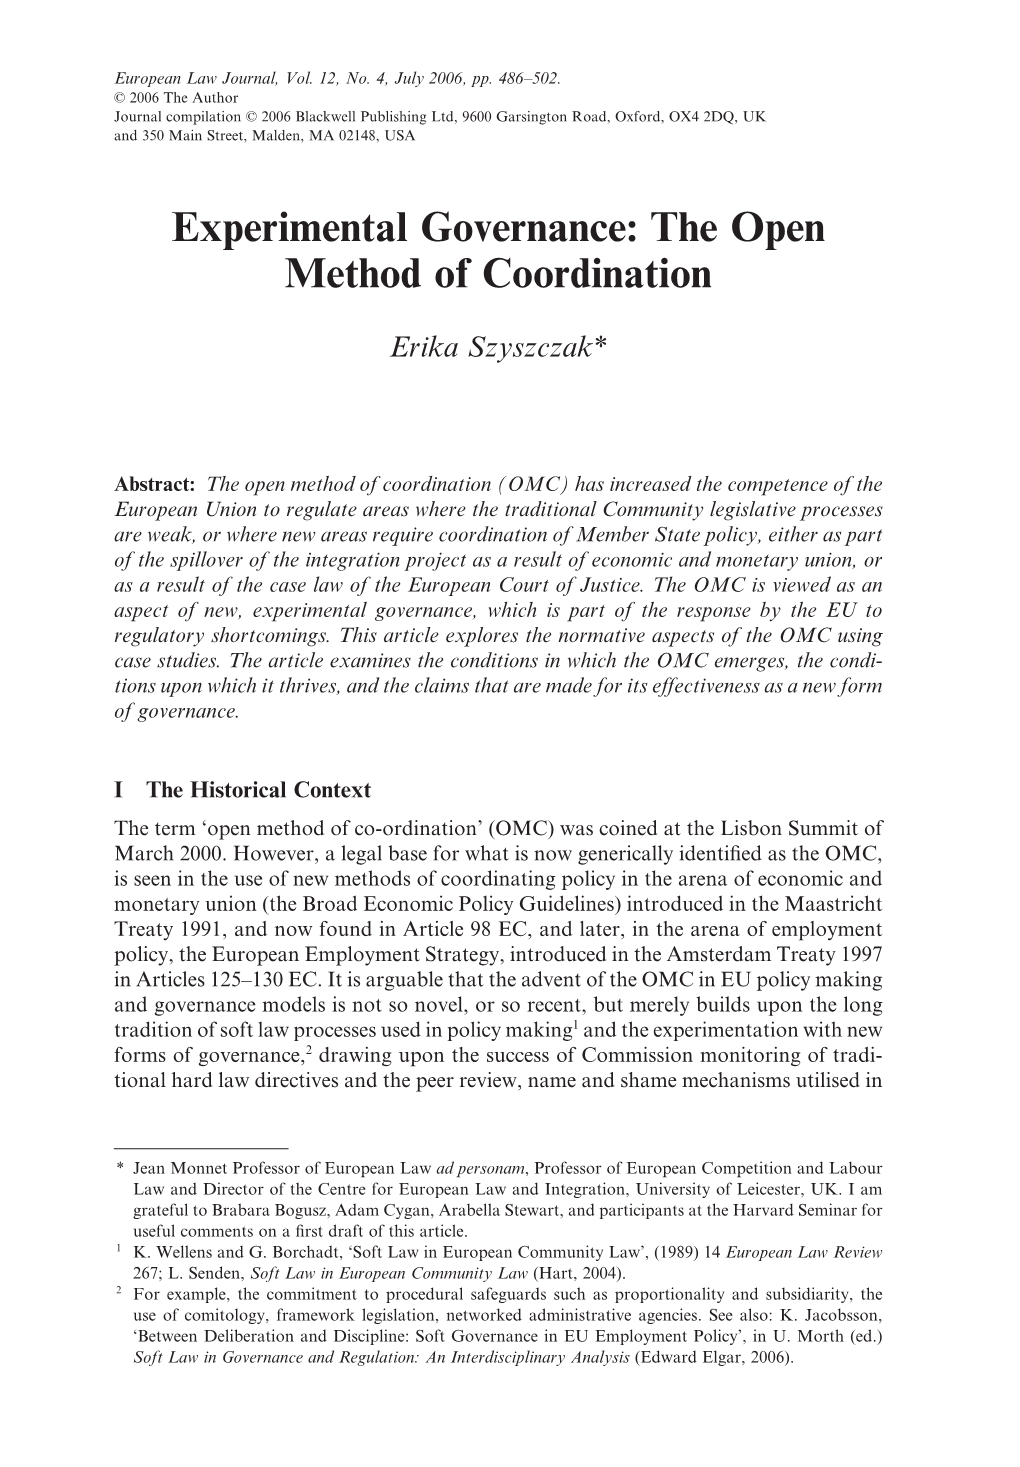 Experimental Governance: the Open Method of Coordination